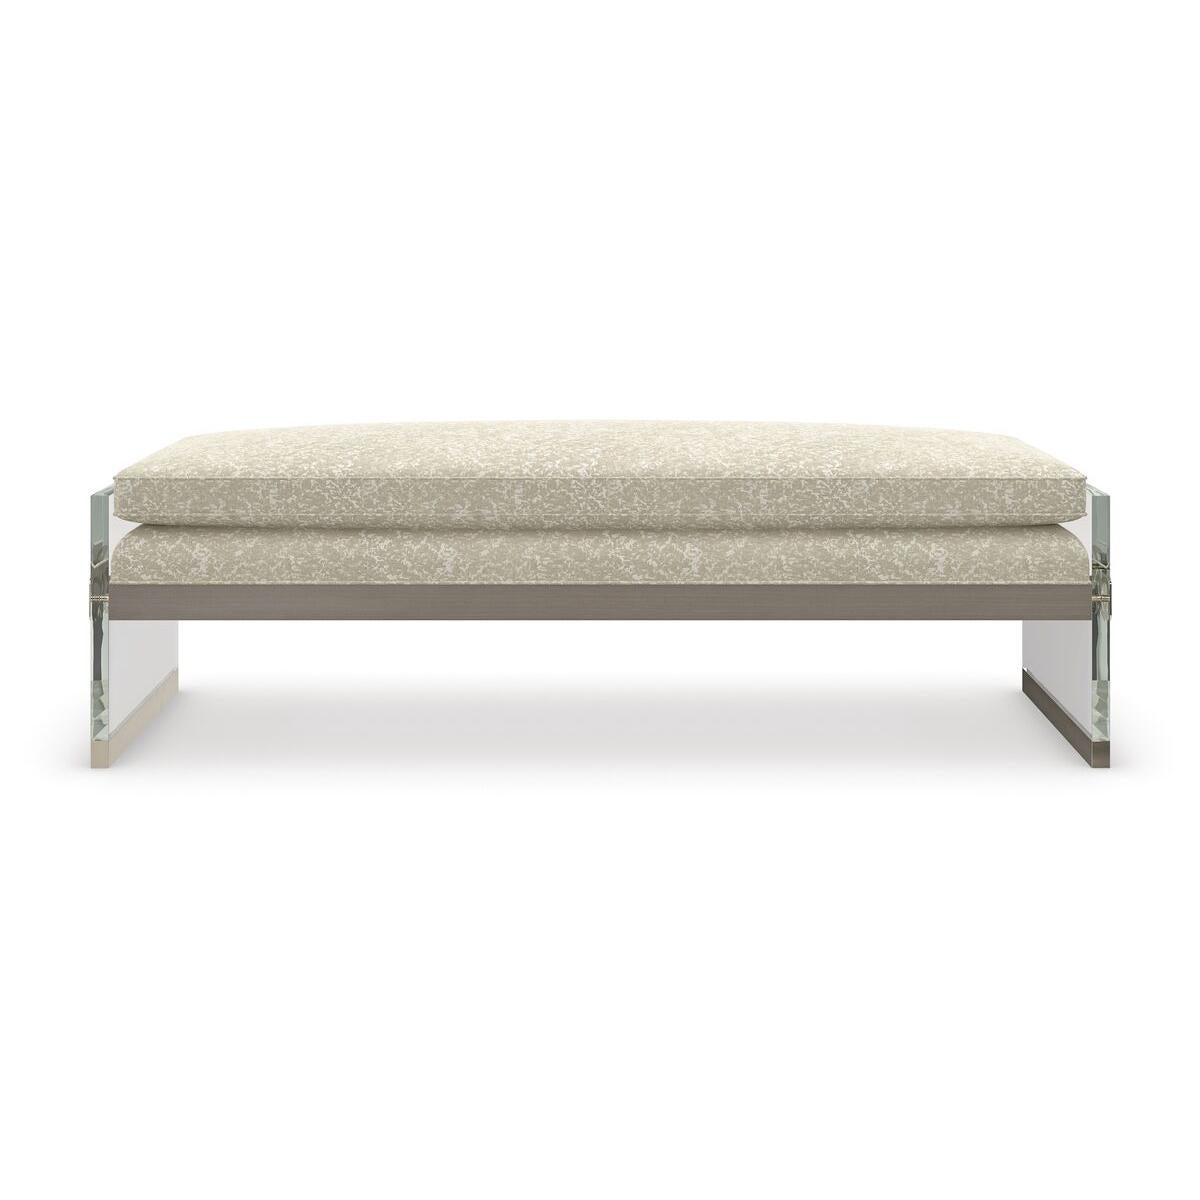 A lavish landing for the end of bed, this bench introduces a note of luxury to bedrooms, powder rooms, and dressing areas. Suspended between two clear acrylic panels, a plush cushioned bench seat beckons in a textured chenille fabric with a lustrous